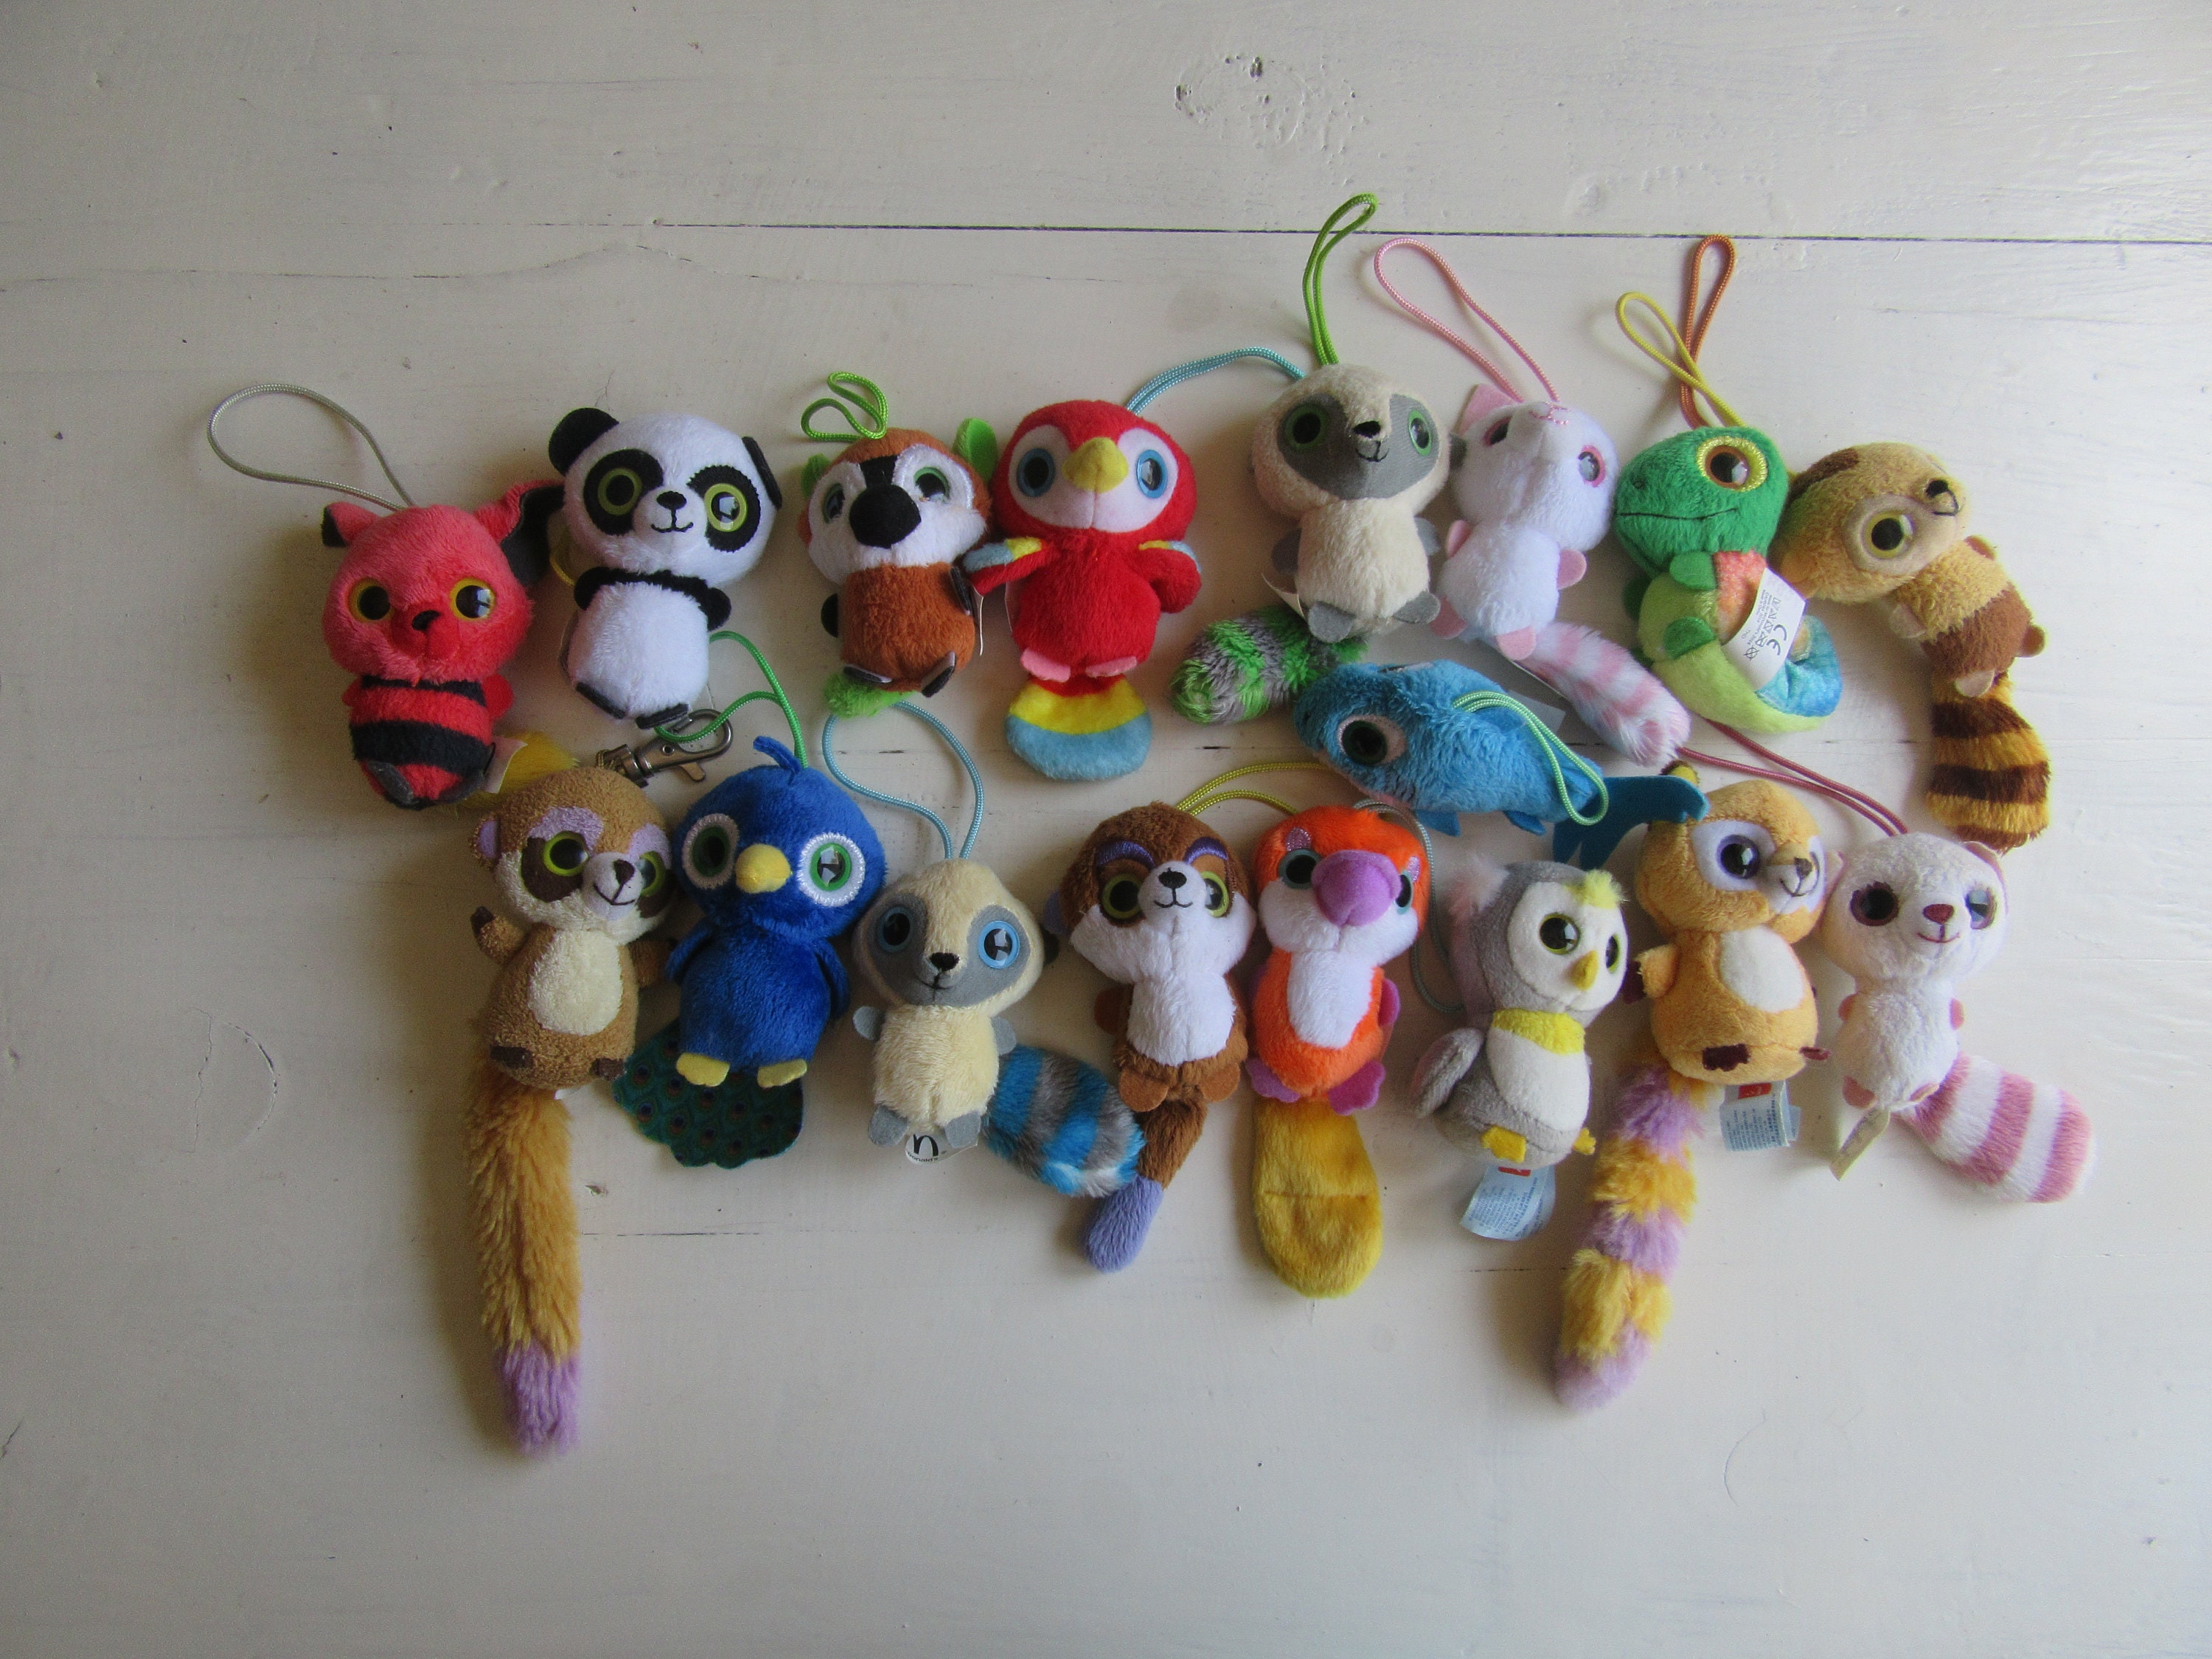 Yoohoo and Friends Vintage Plush Toys Collection - Etsy